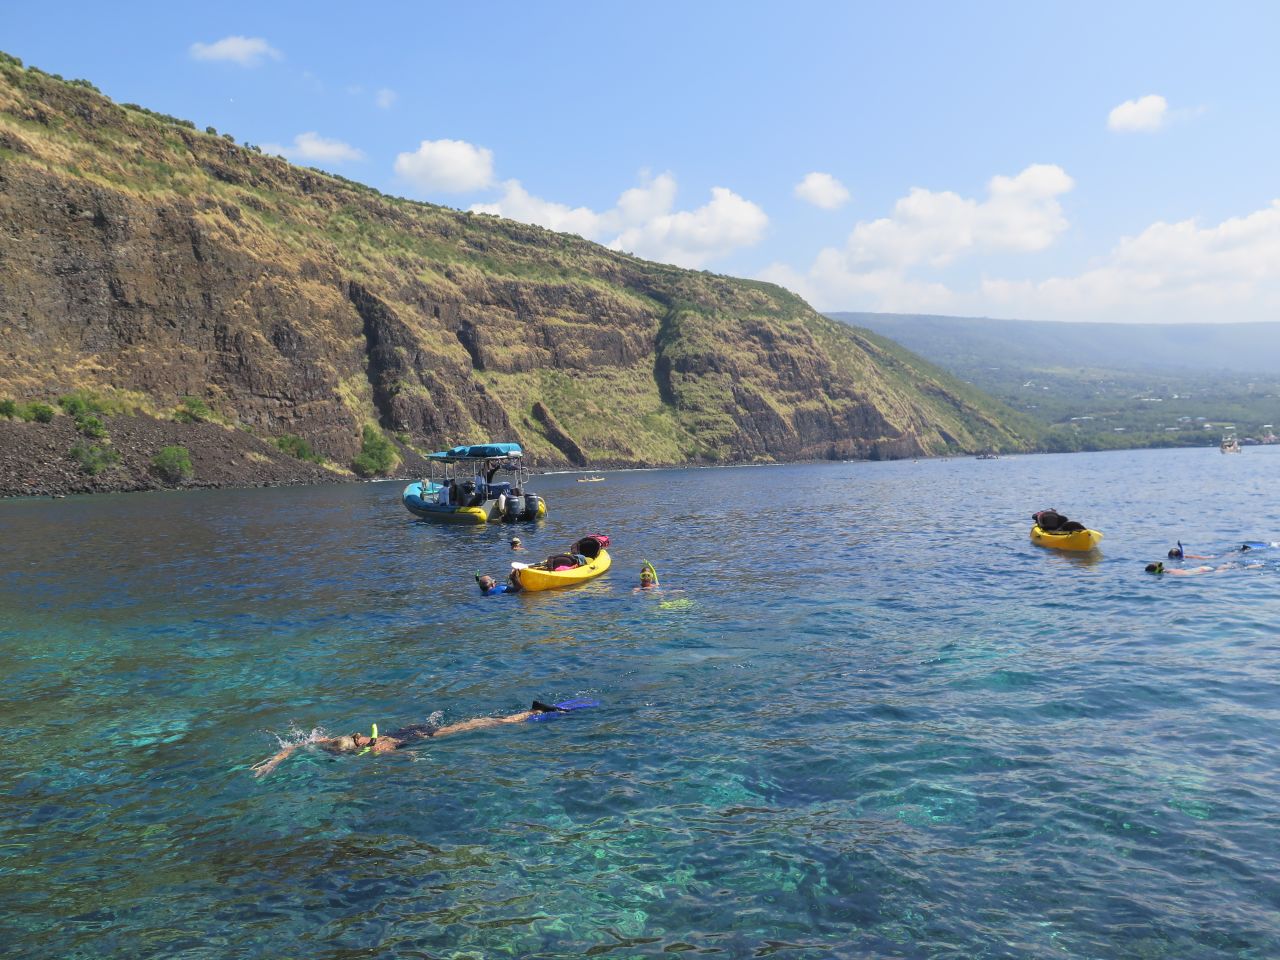 Kealakekua Bay: Weird though it may be to think, Captain James Cook was killed in a pretty beautiful spot.